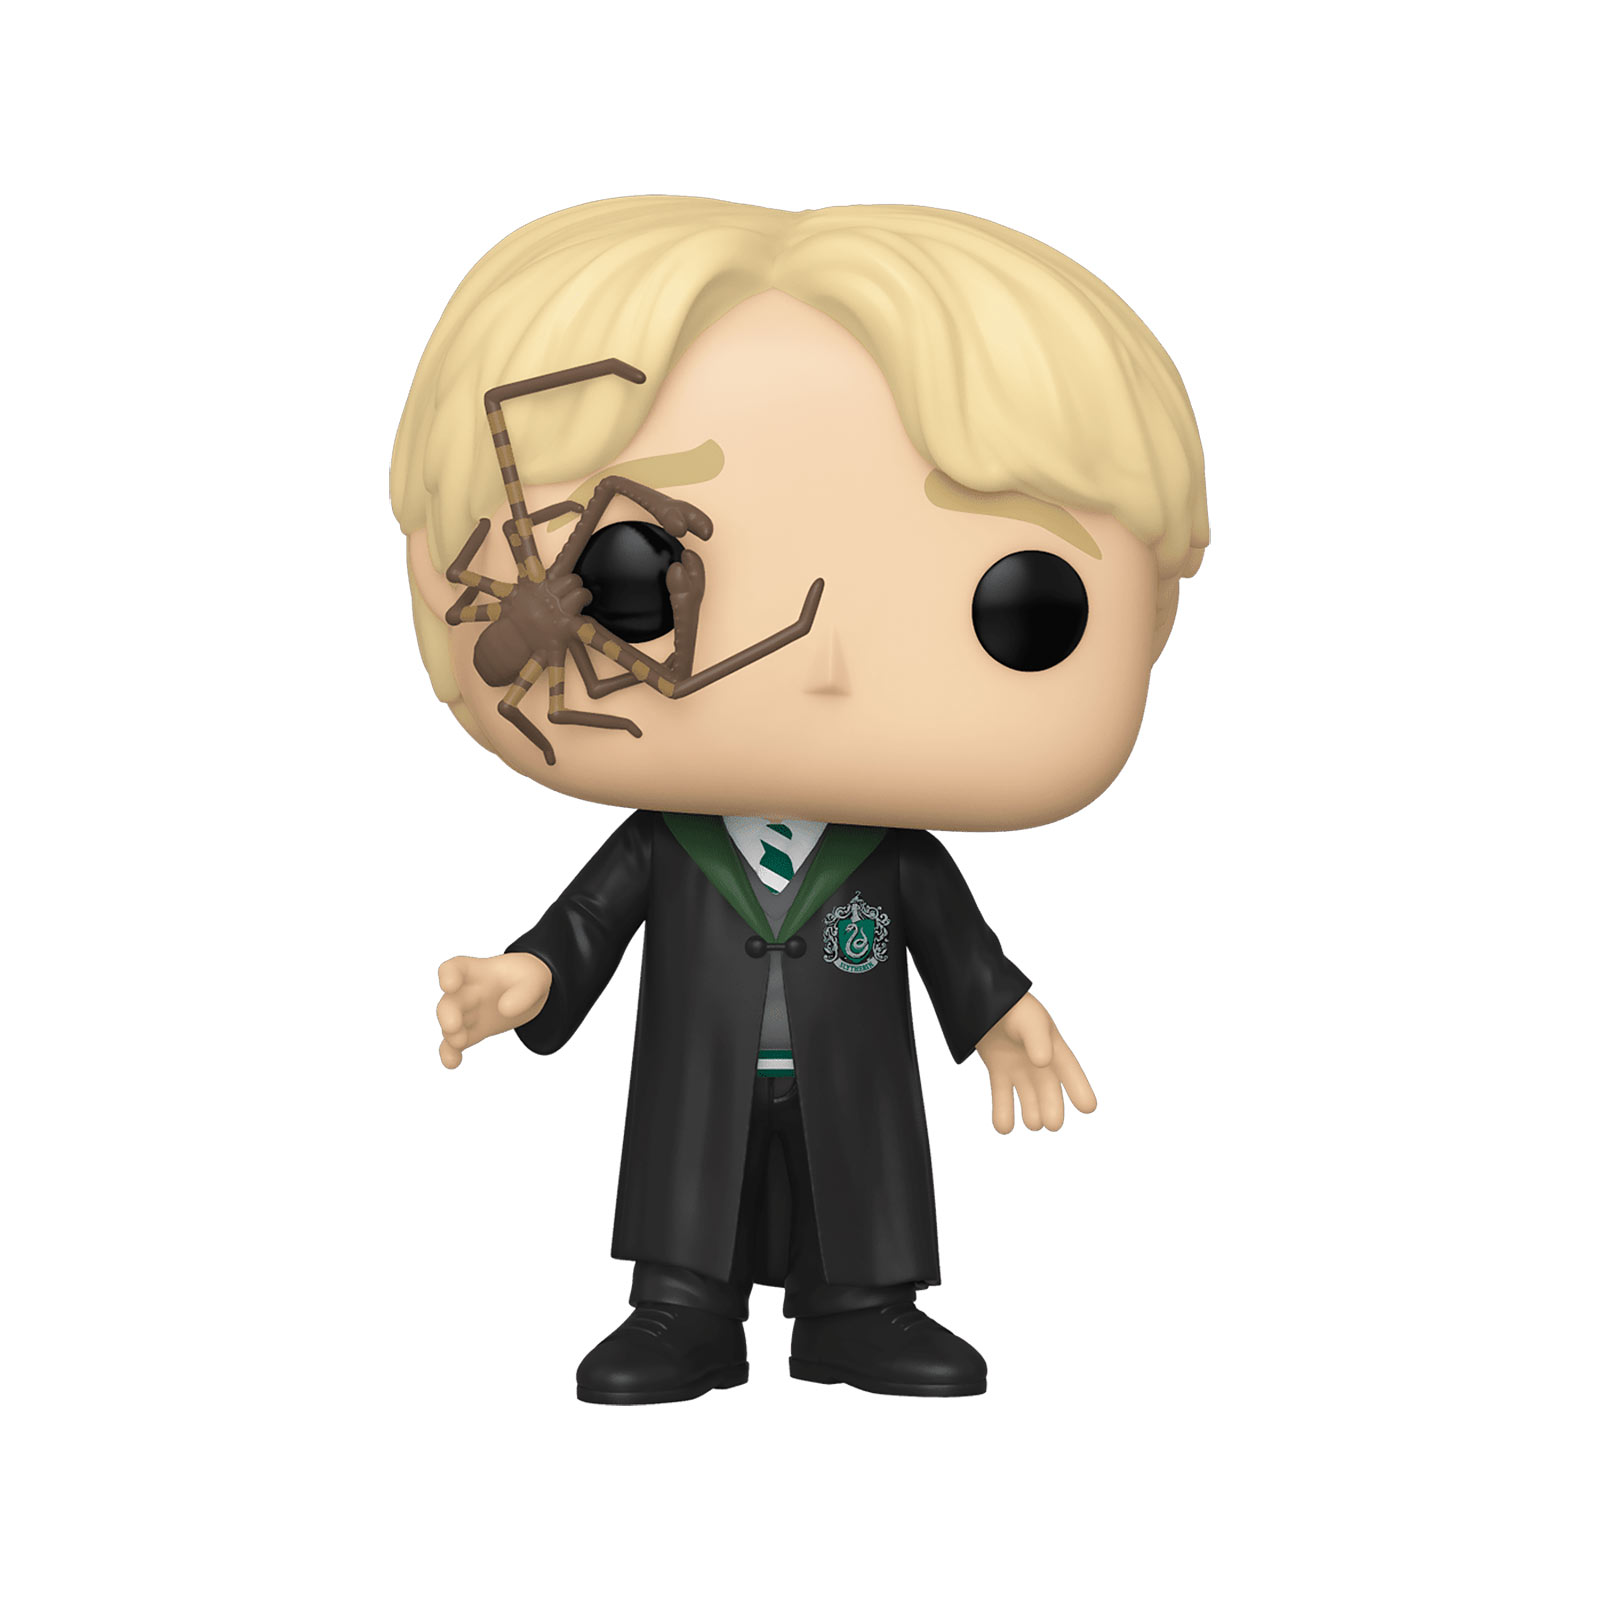 Harry Potter - Draco Malfoy with spider Funko Pop Figurine